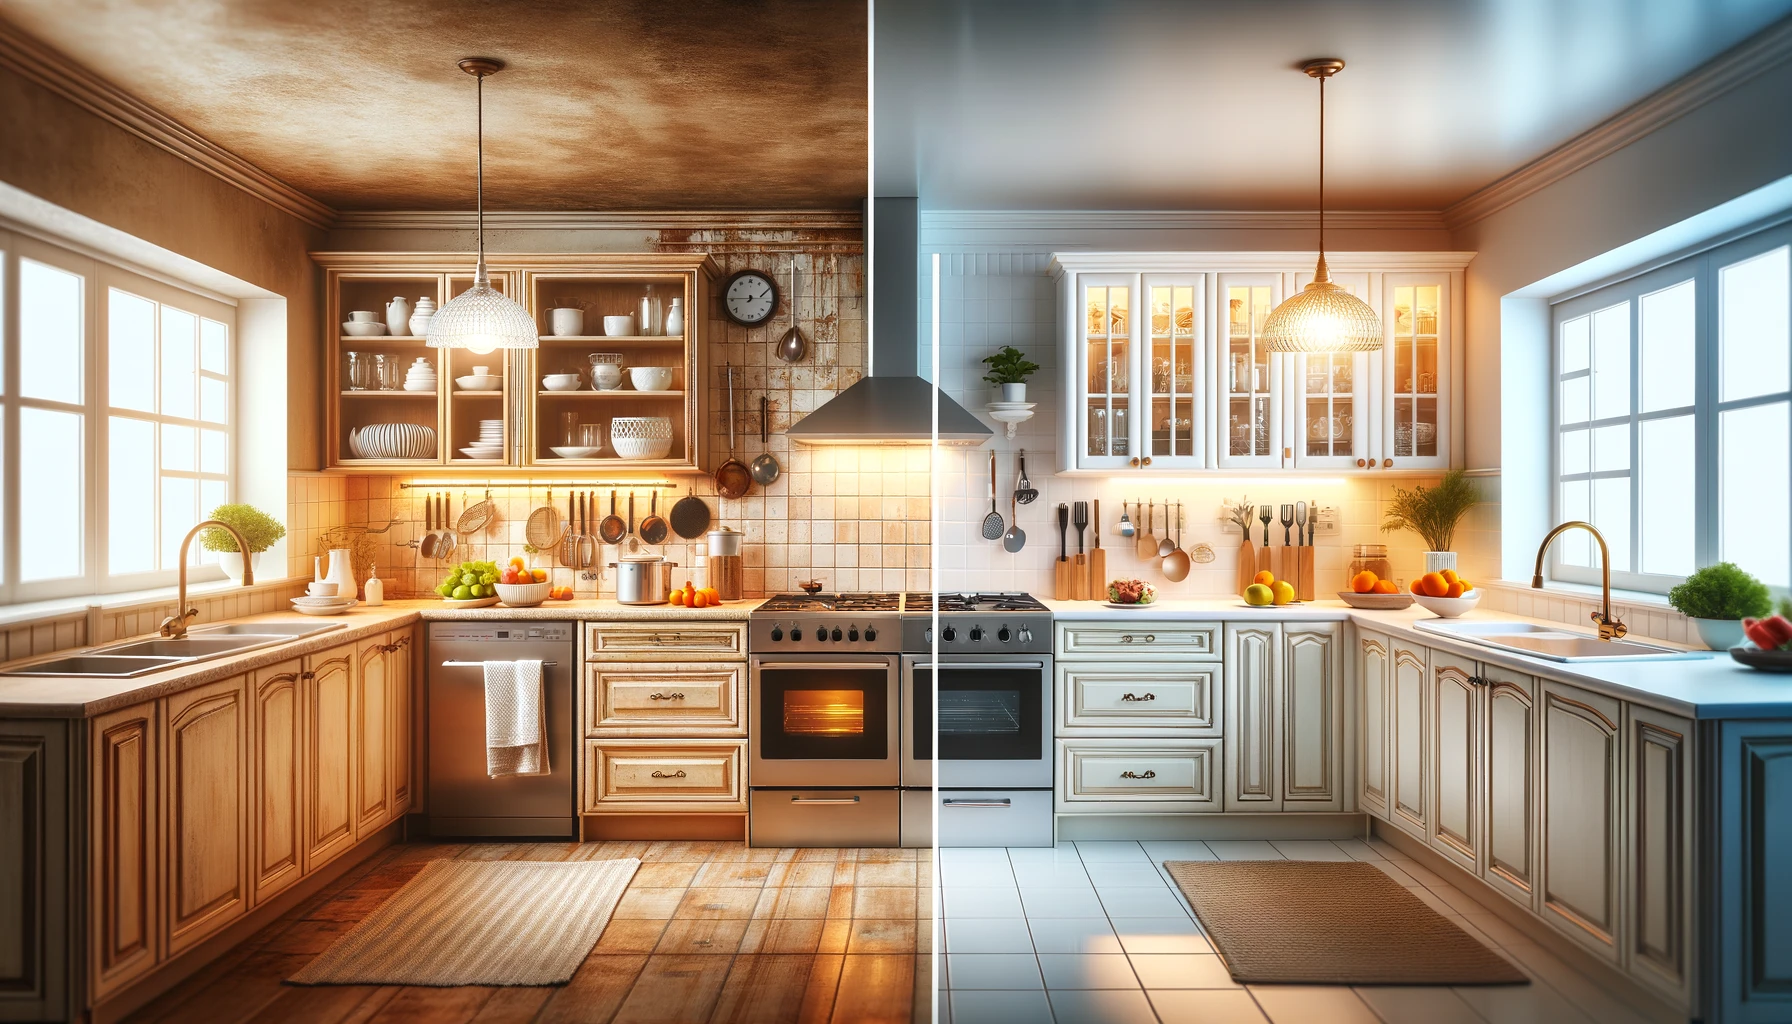 photograph image of a before-and-after comparison of a kitchen remodeling project.